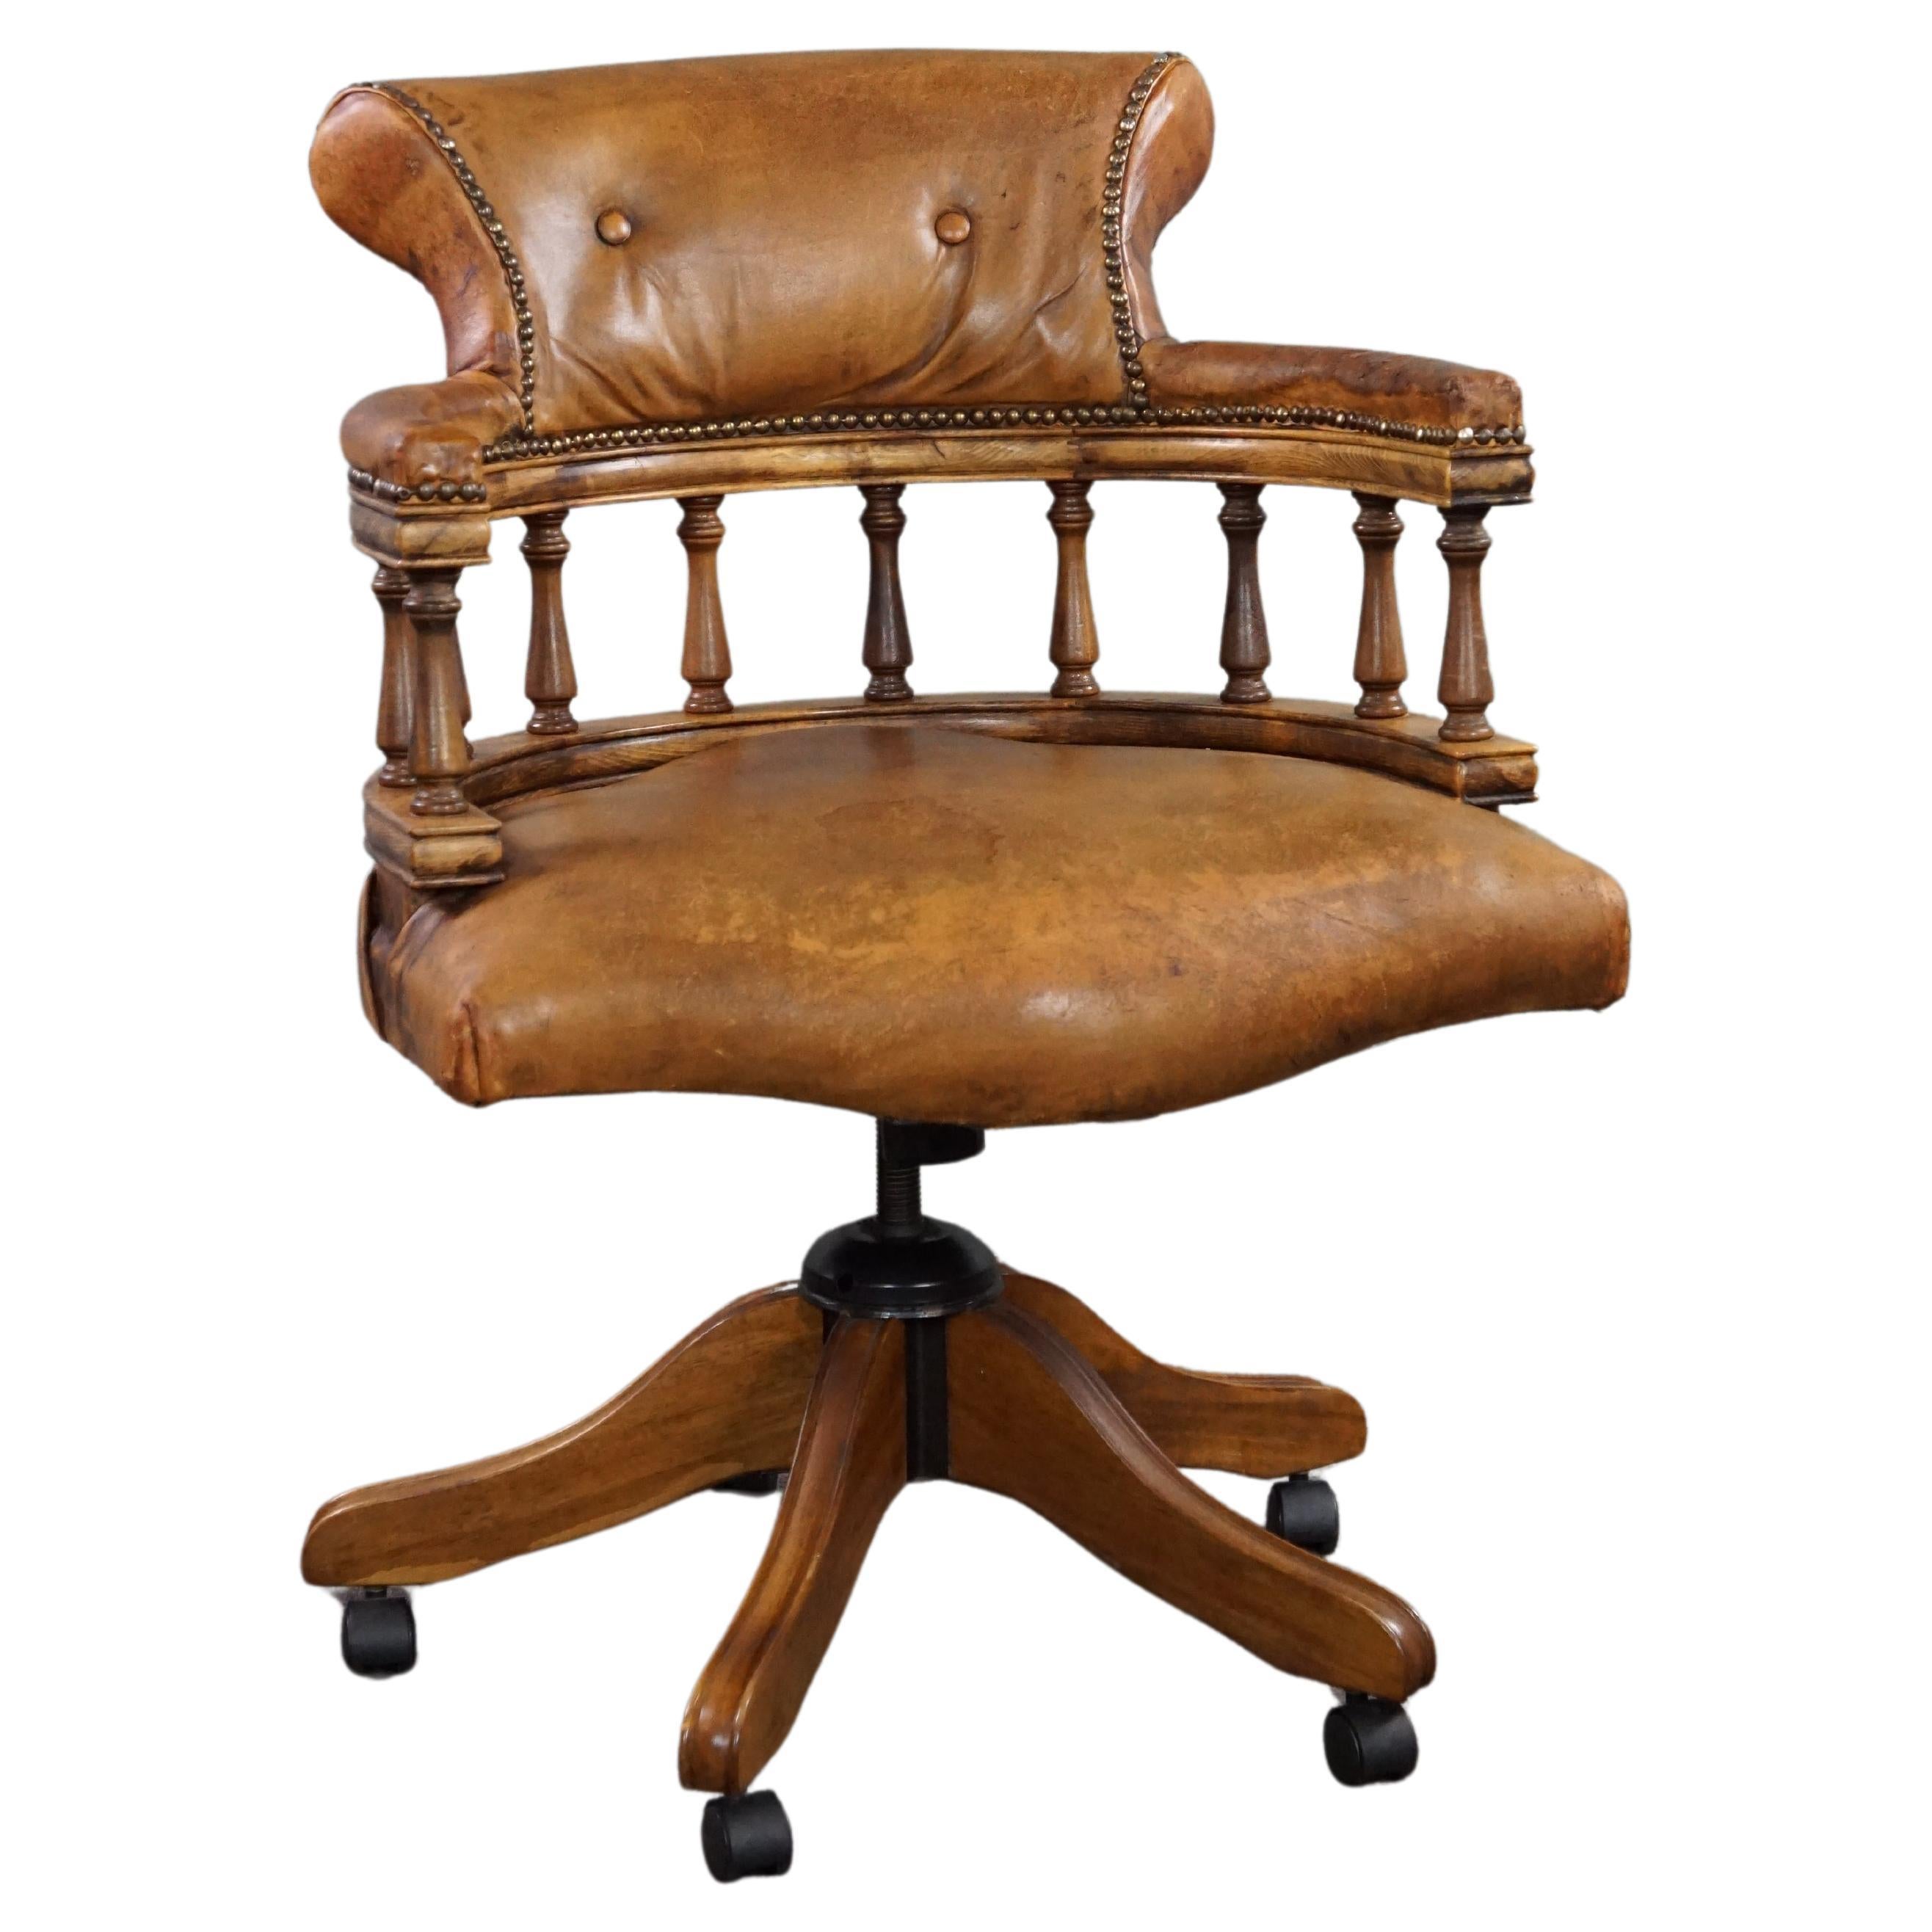 Sheep leather Captains Chair / office chair